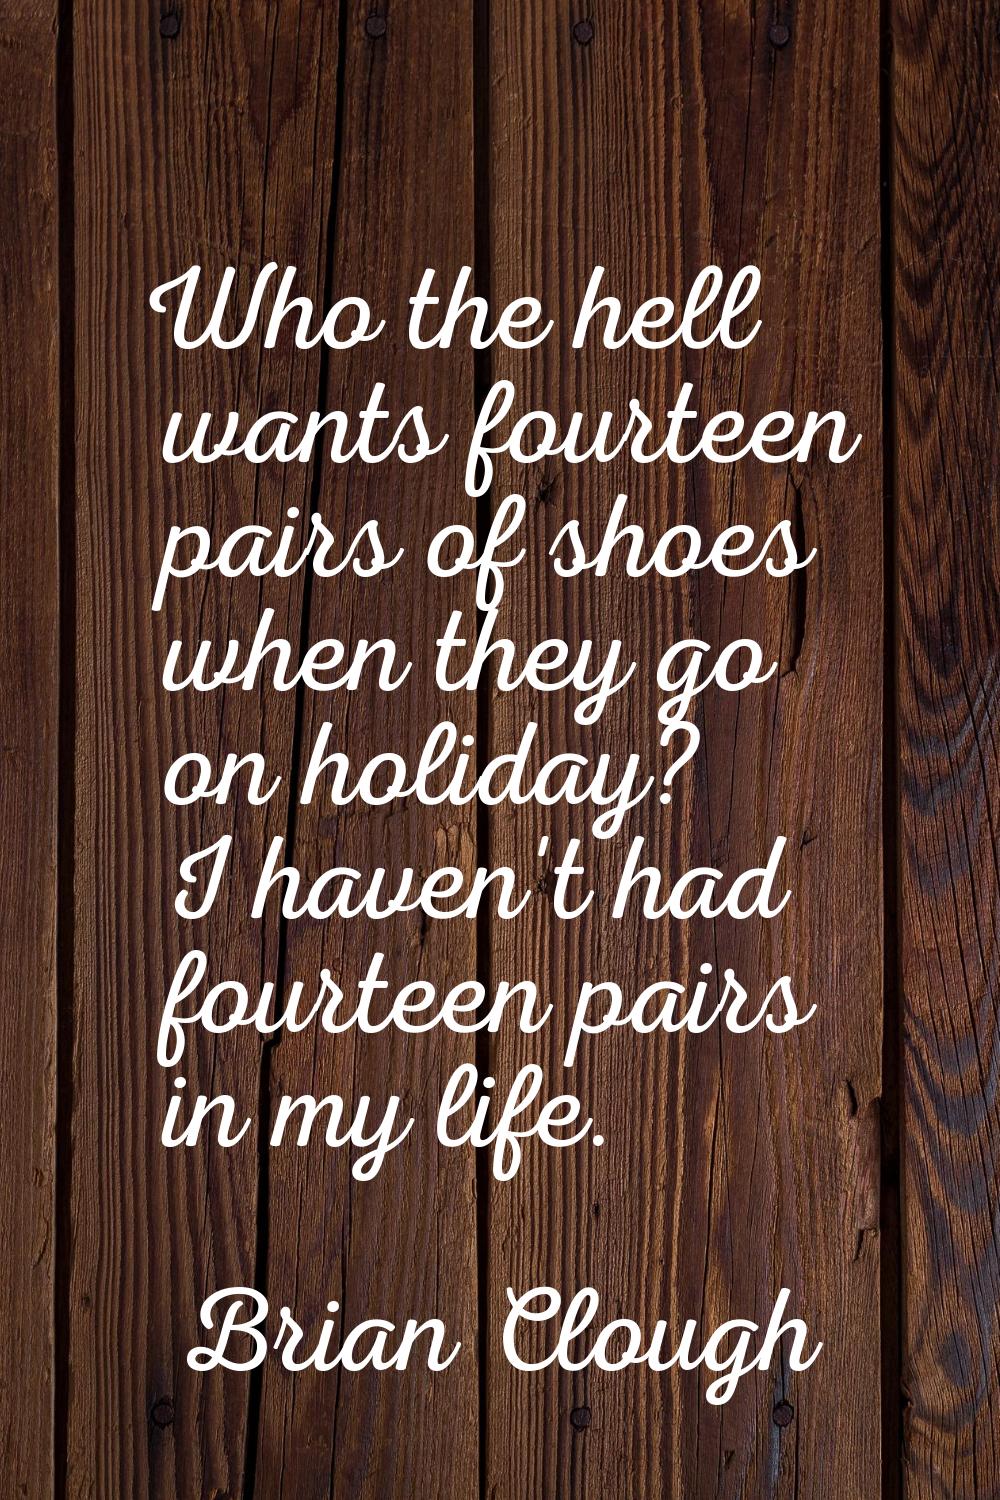 Who the hell wants fourteen pairs of shoes when they go on holiday? I haven't had fourteen pairs in